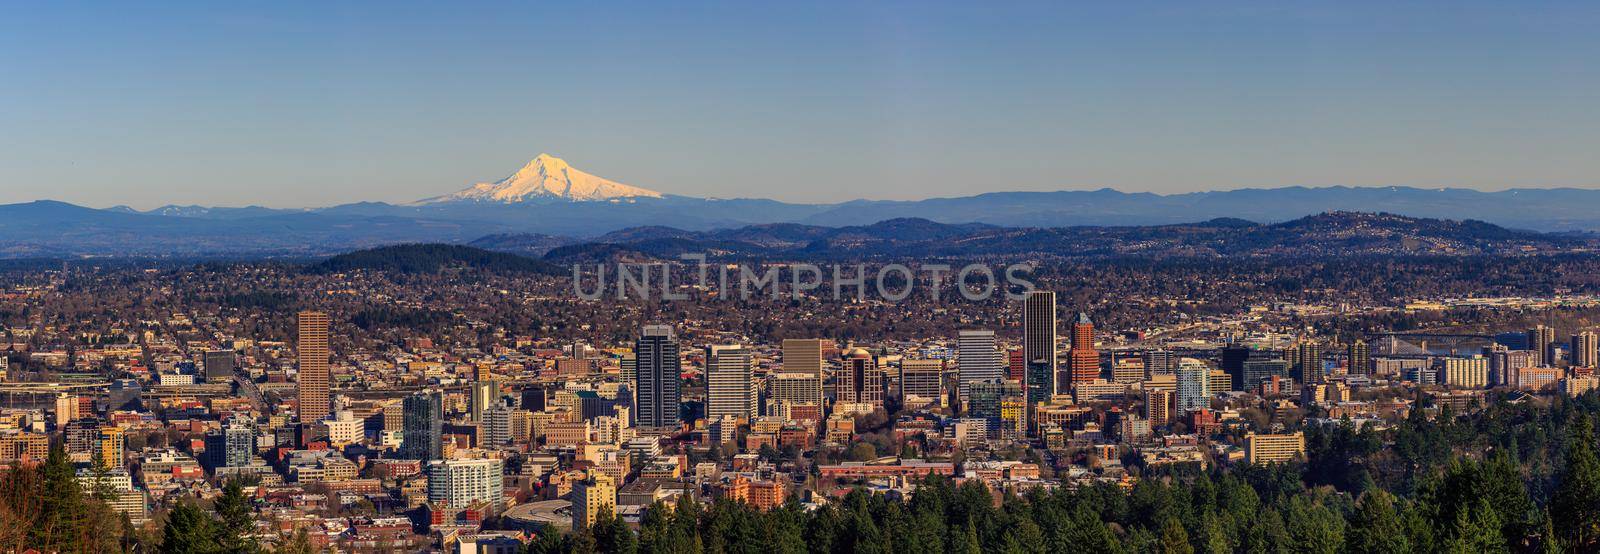 Portland Downtown Cityscape by gepeng